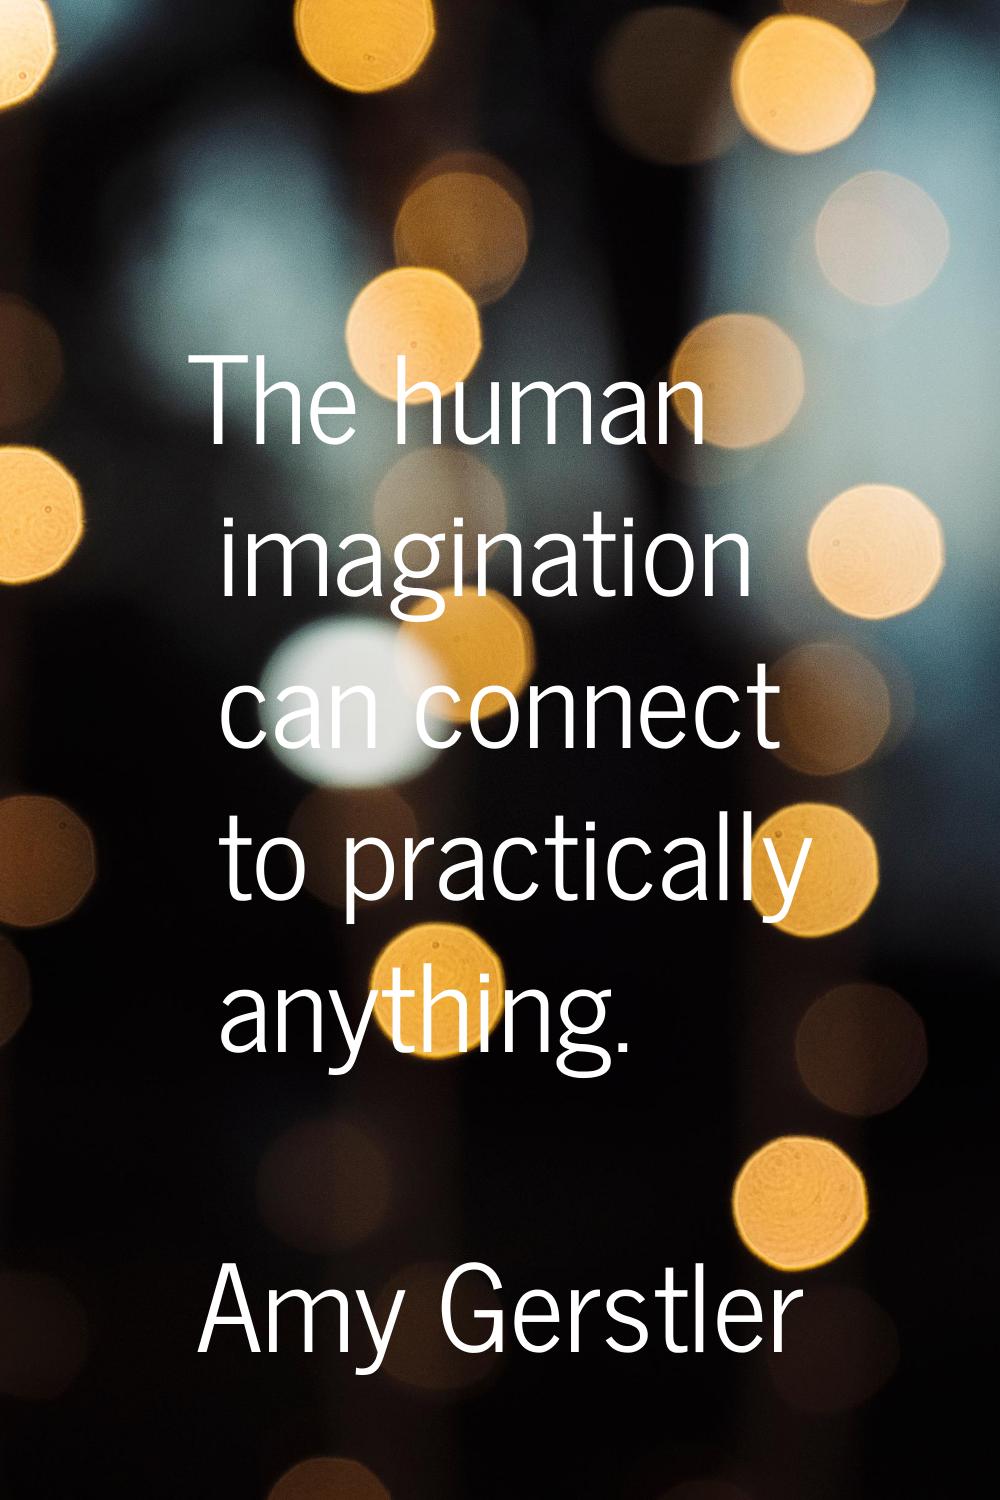 The human imagination can connect to practically anything.